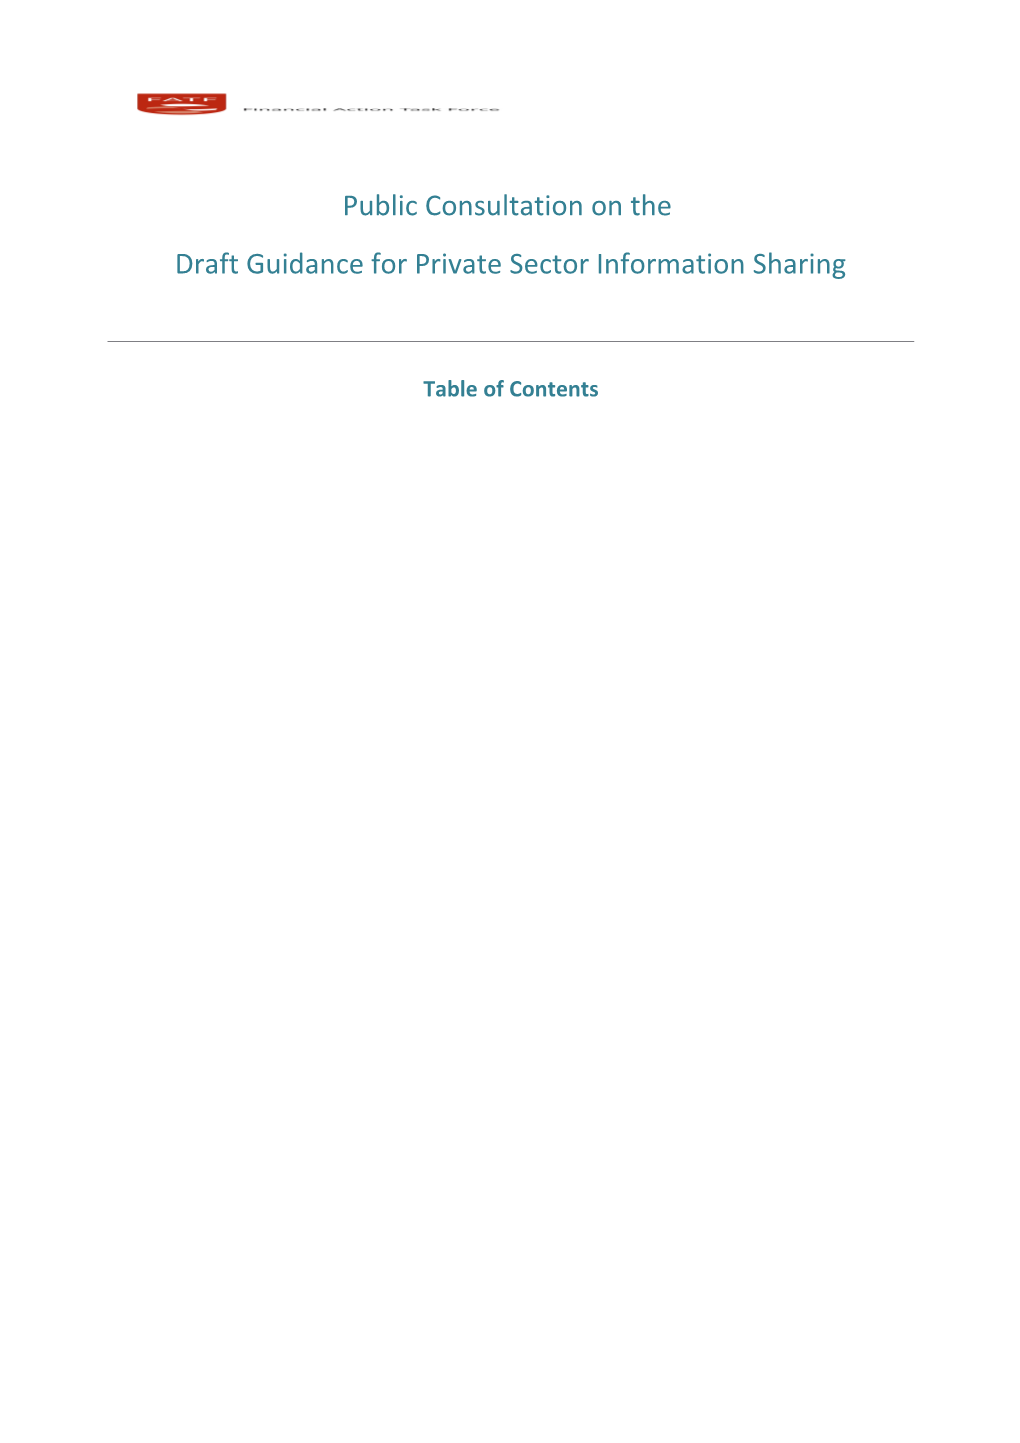 Ublic Consultation on the Draft Guidance for Private Sector Information Sharin